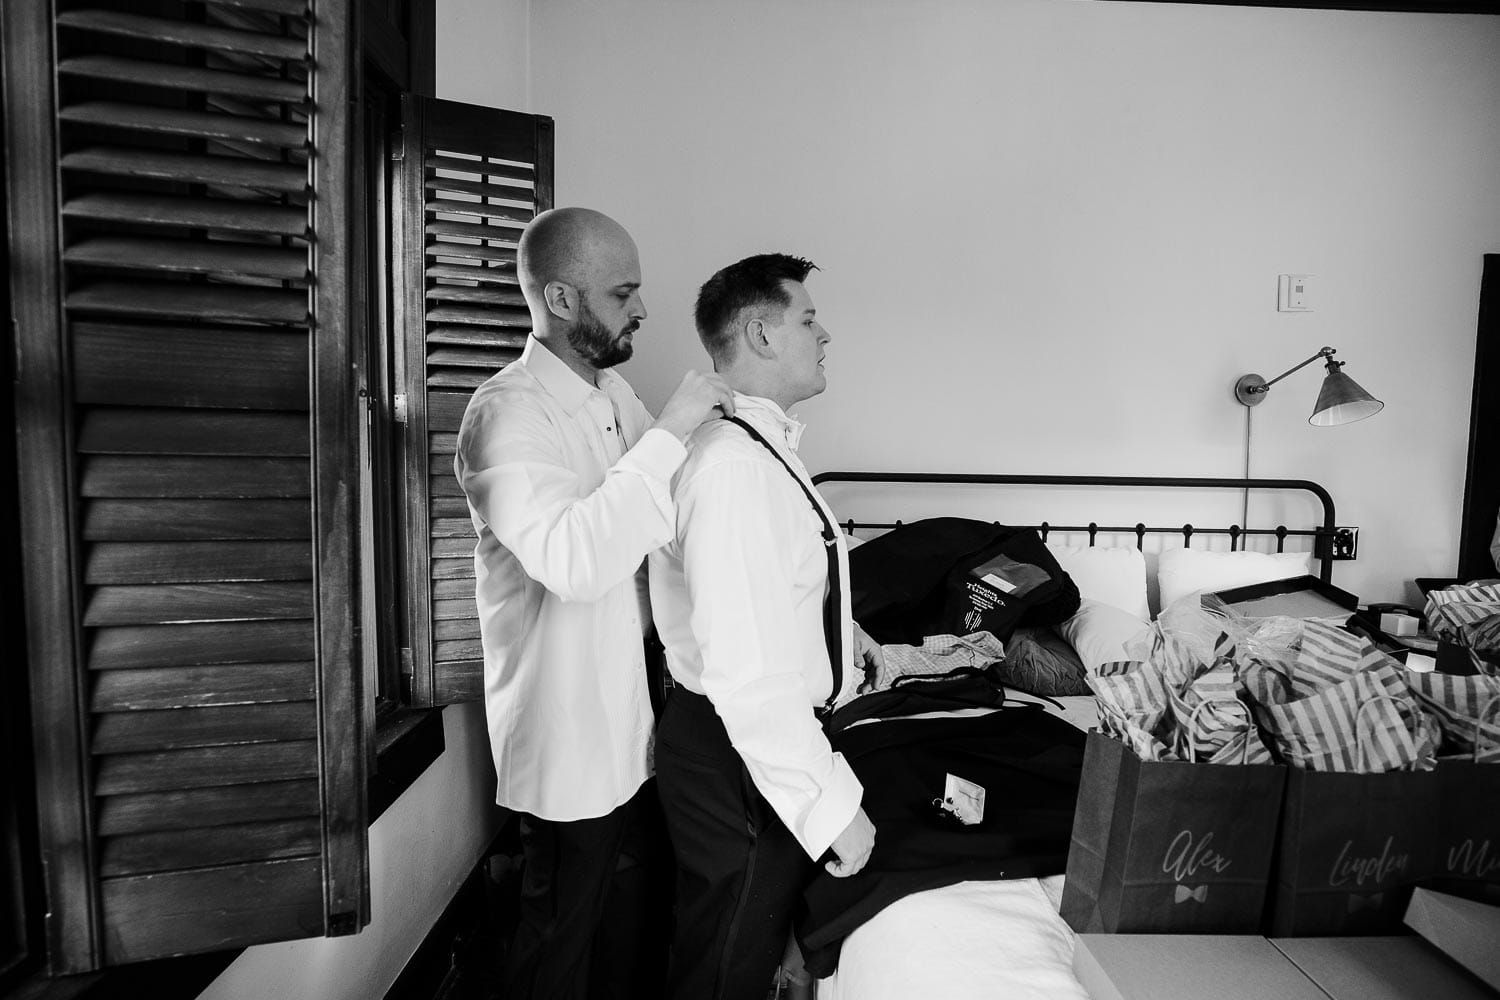 The groom gets.a helping hand from a groomsman at Hotel Havana